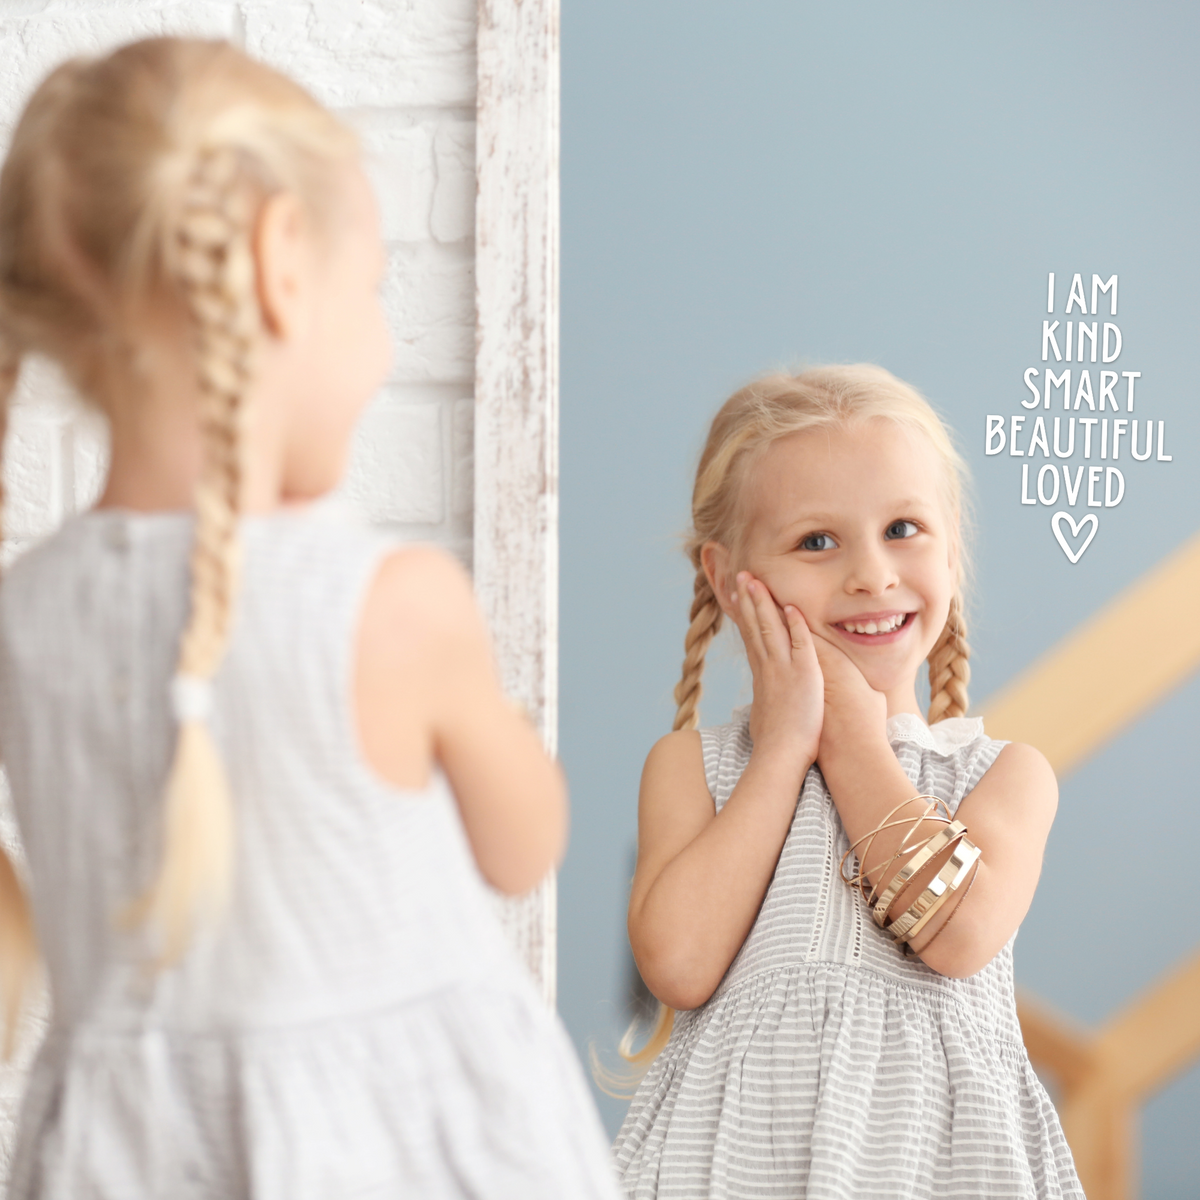 Girl looking into mirror that has a positive affirmation decal sticker on it. The decal says "I am kind, smart, beautiful, loved."